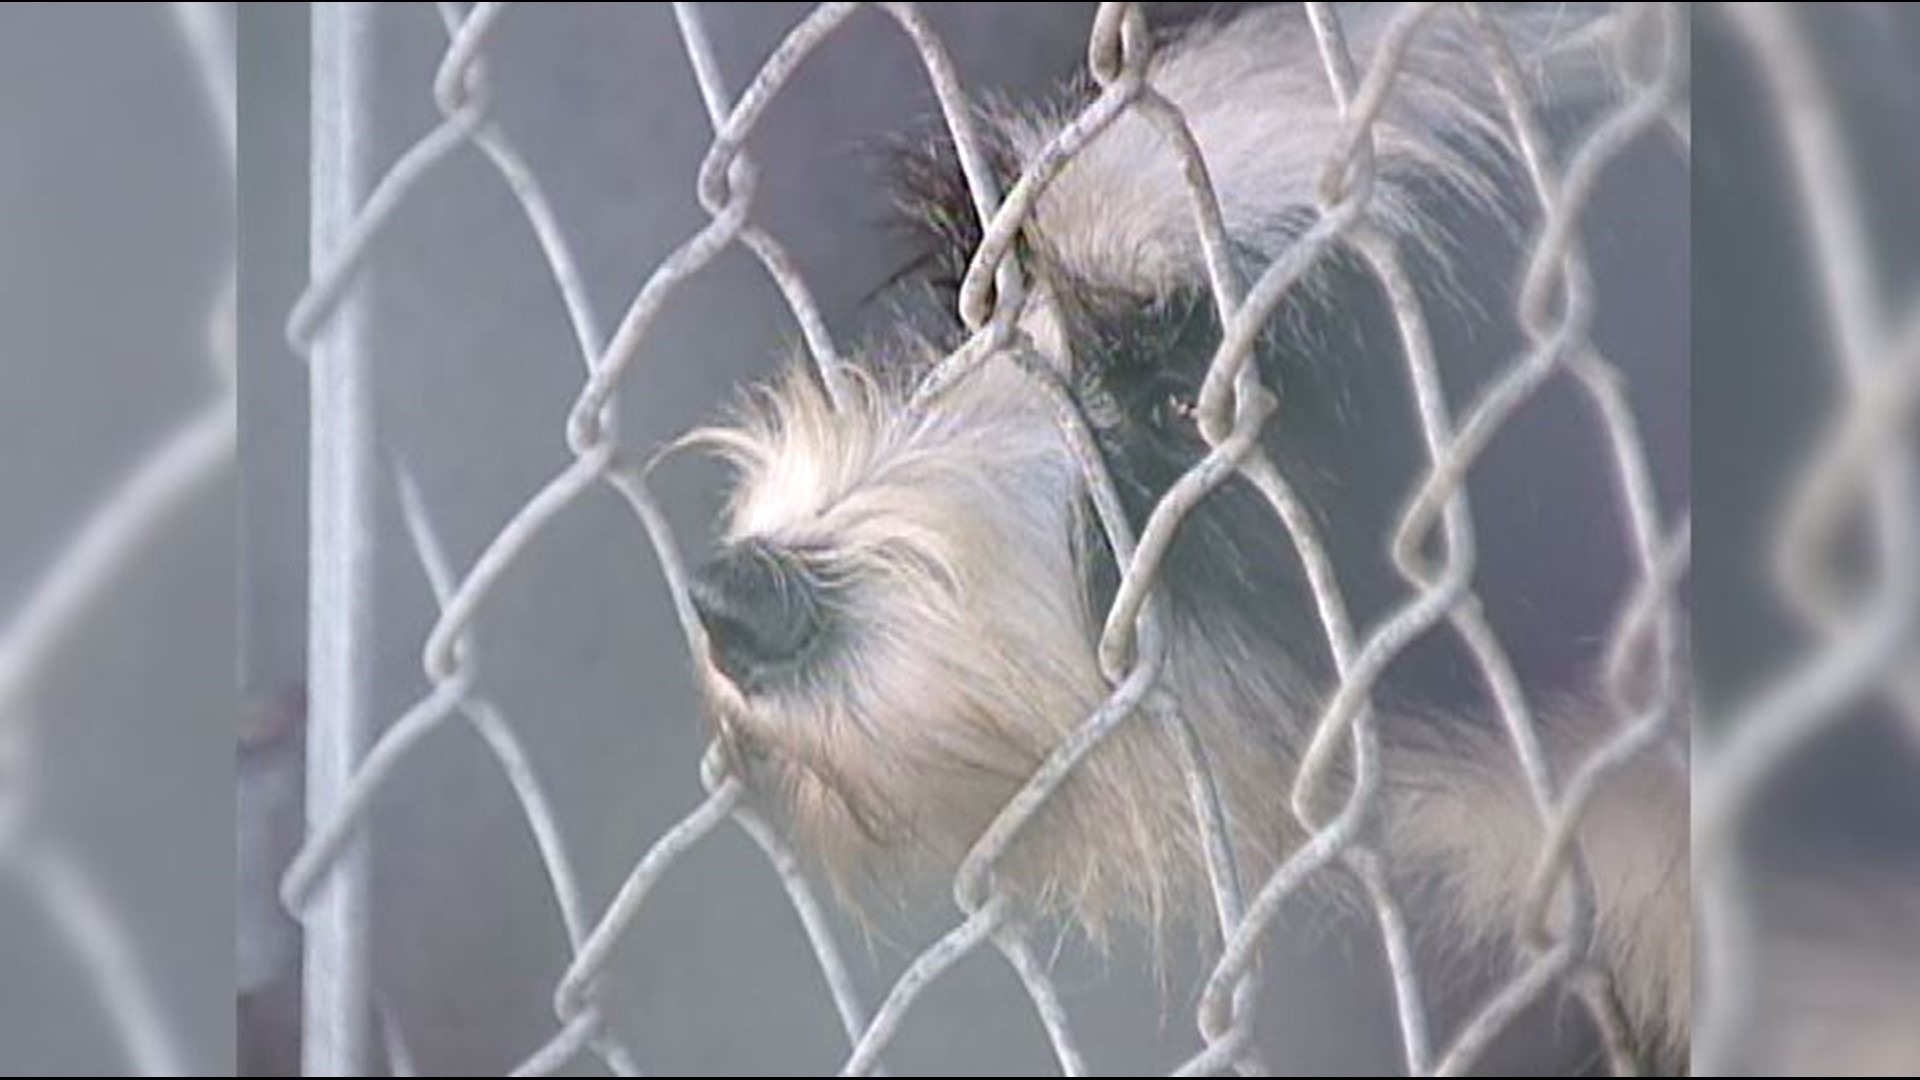 "Every kennel and animal enclosure is full and we are no longer able to intake animals from our shelter partners," the organization said in a release.